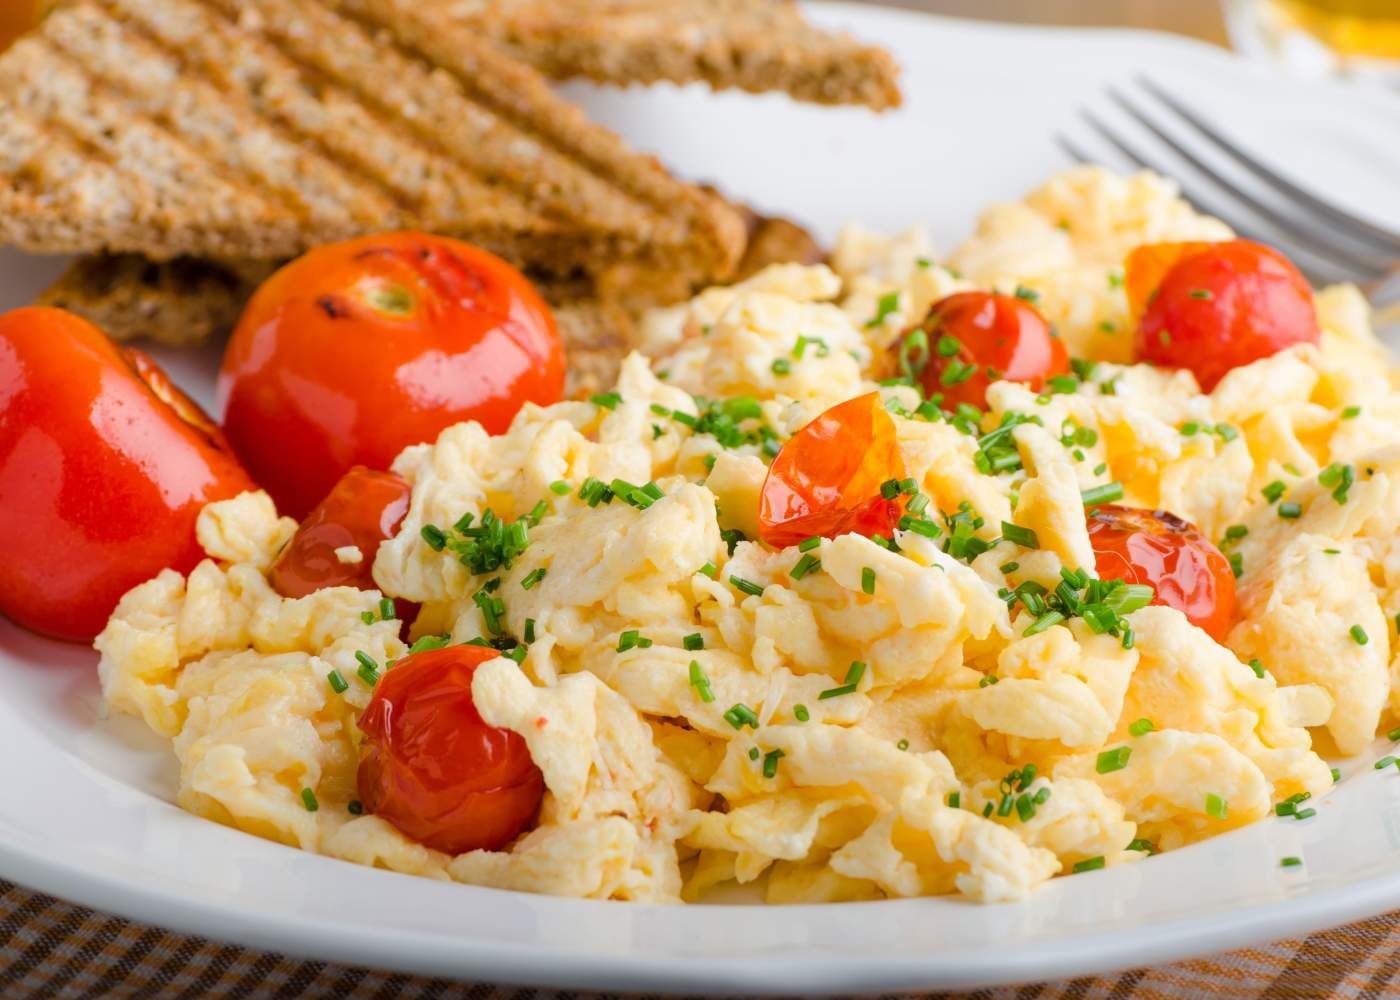 Scrambled Eggs with tomatoes and toast.